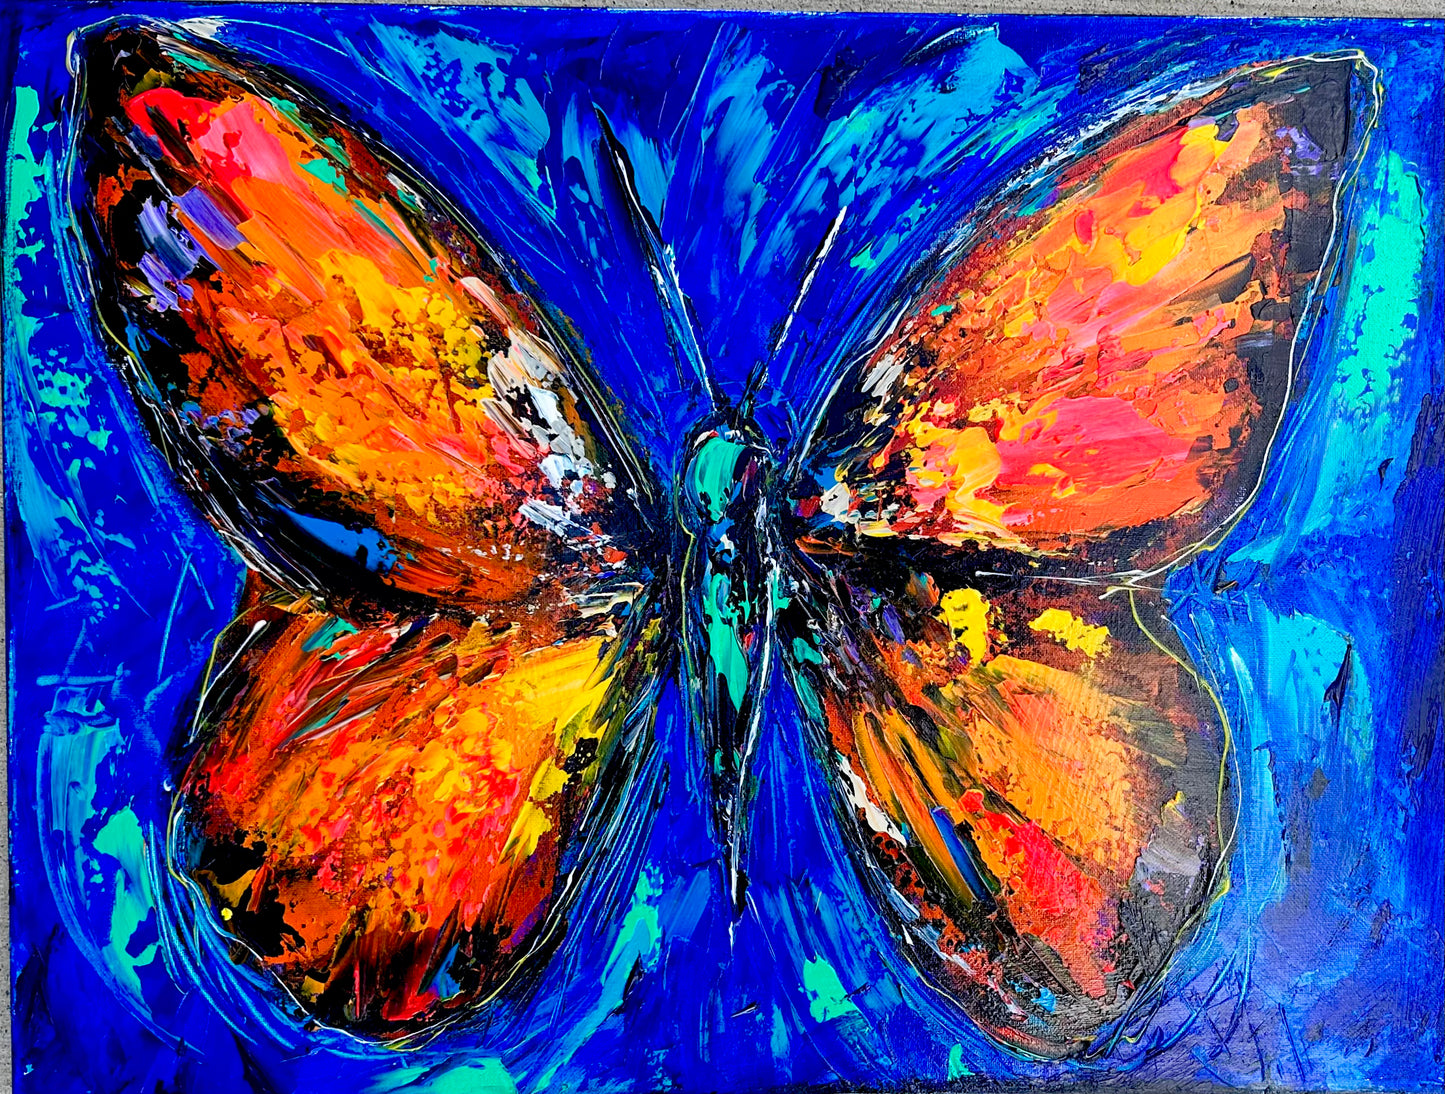 16x20 Vibrant High Quality Print: Butterfly “Change is Beautiful”